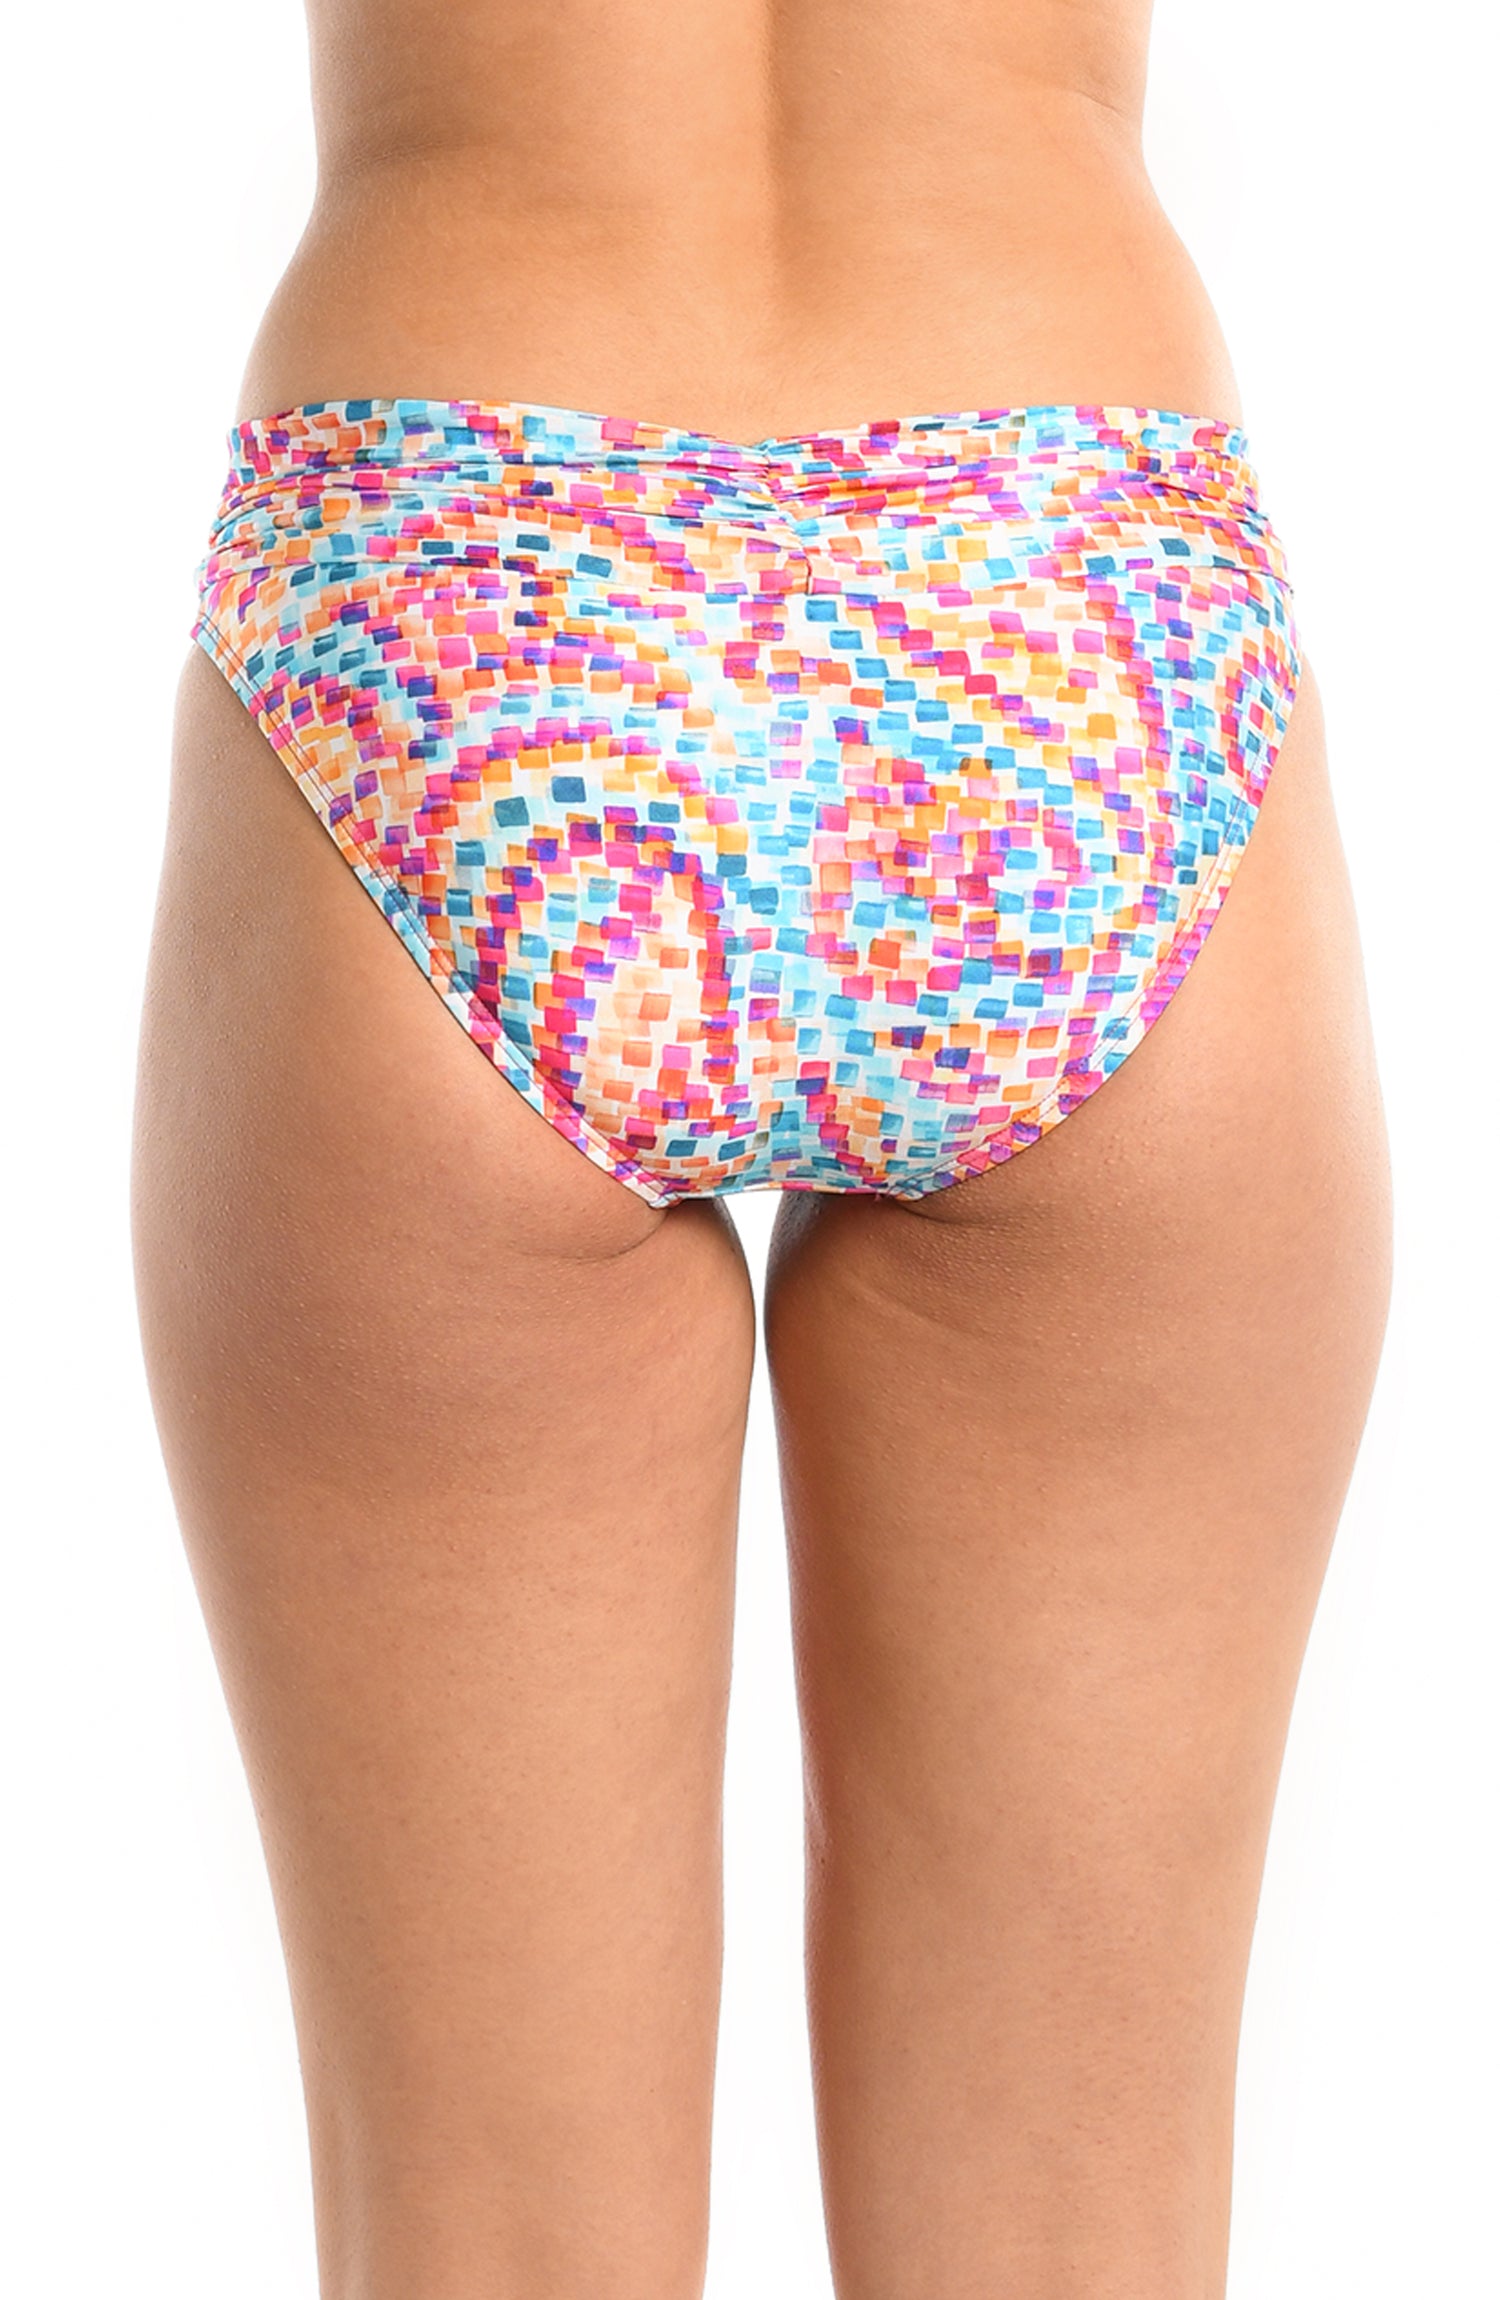 Model is wearing a pink multicolored paisley printed shirred band hipster bikini bottom from our Pebble Beach collection.